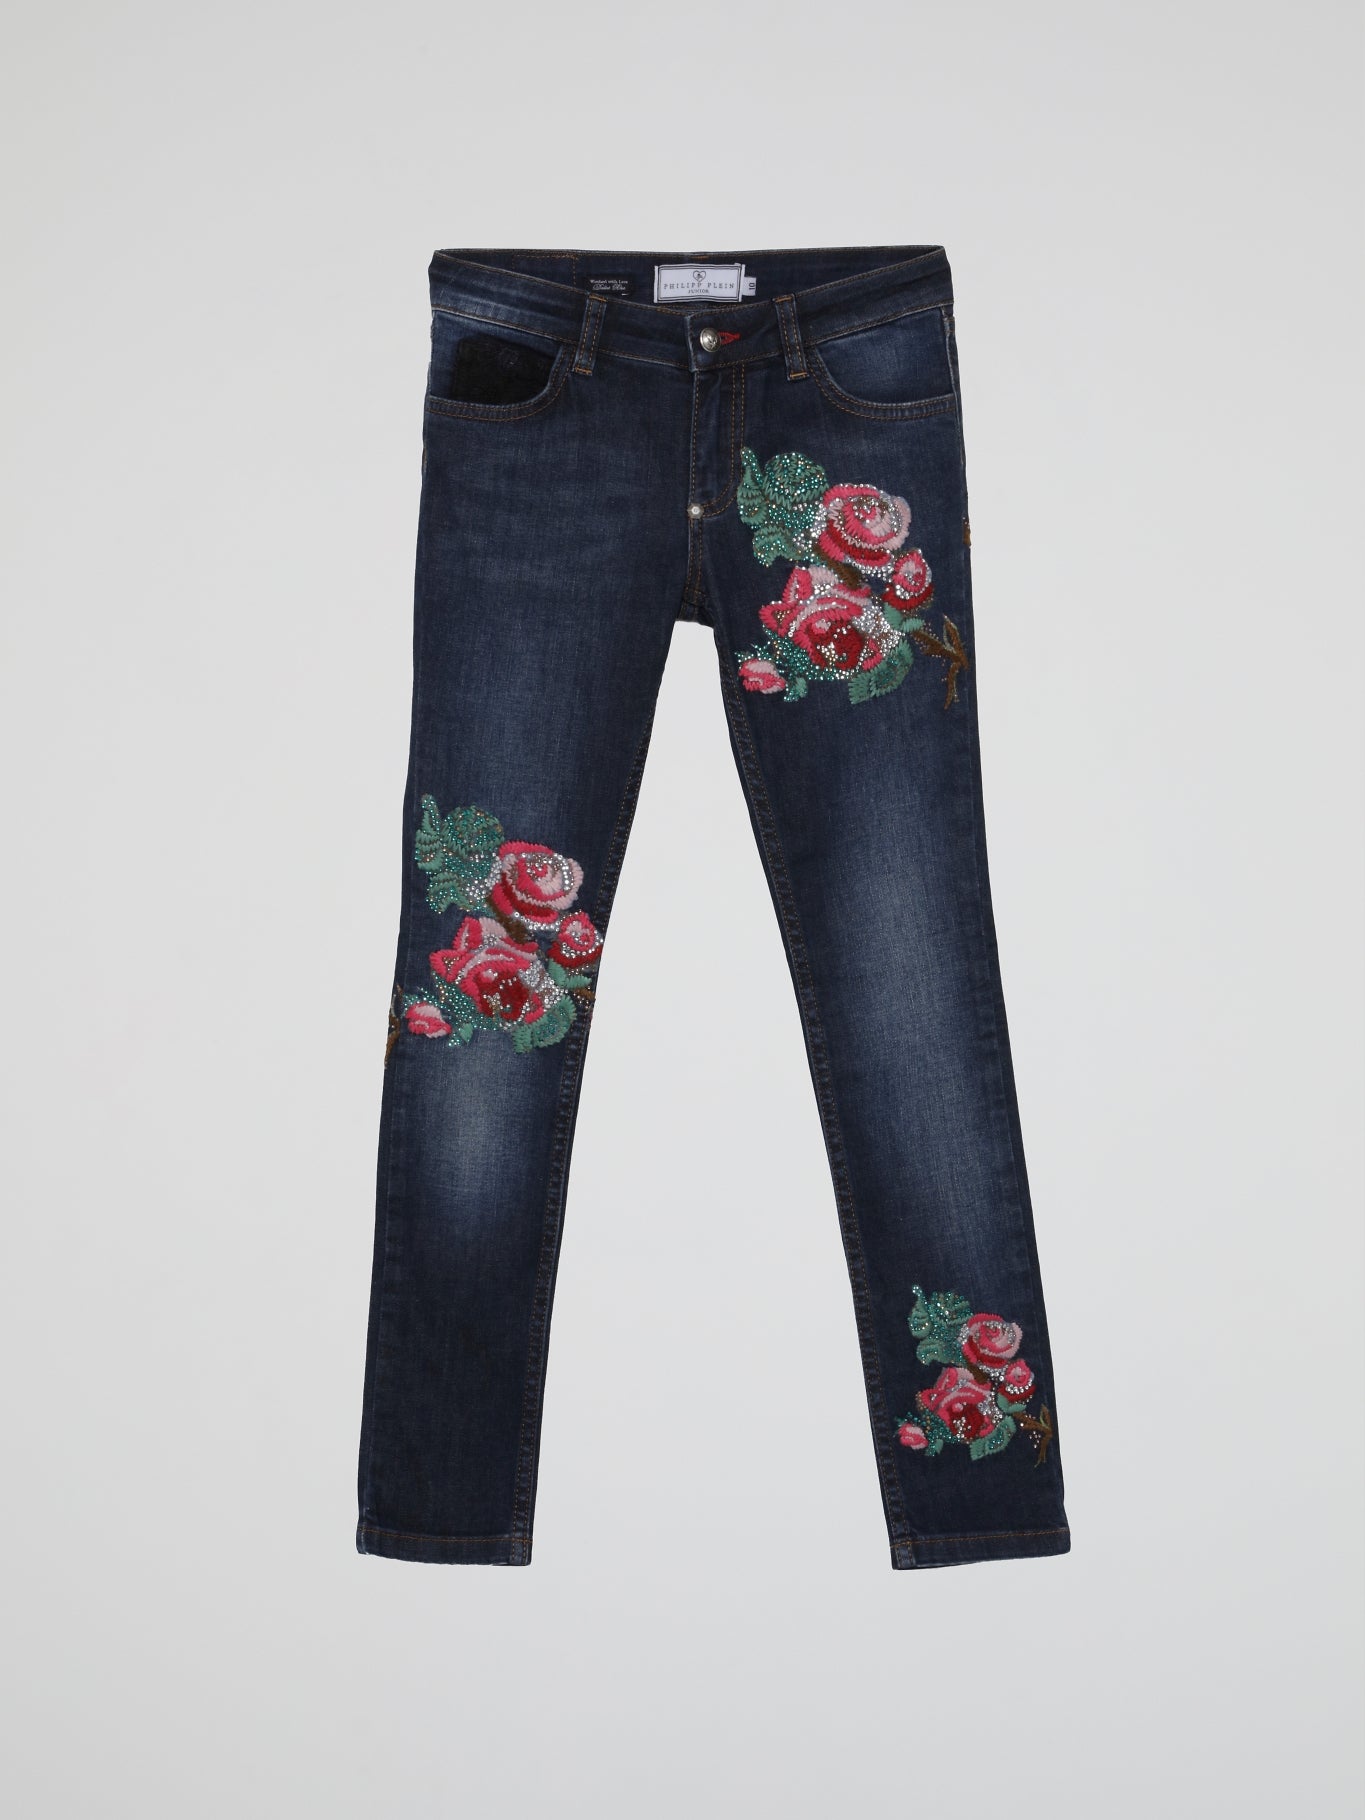 Navy Embroidered Flowers Denim Jeans (Kids)